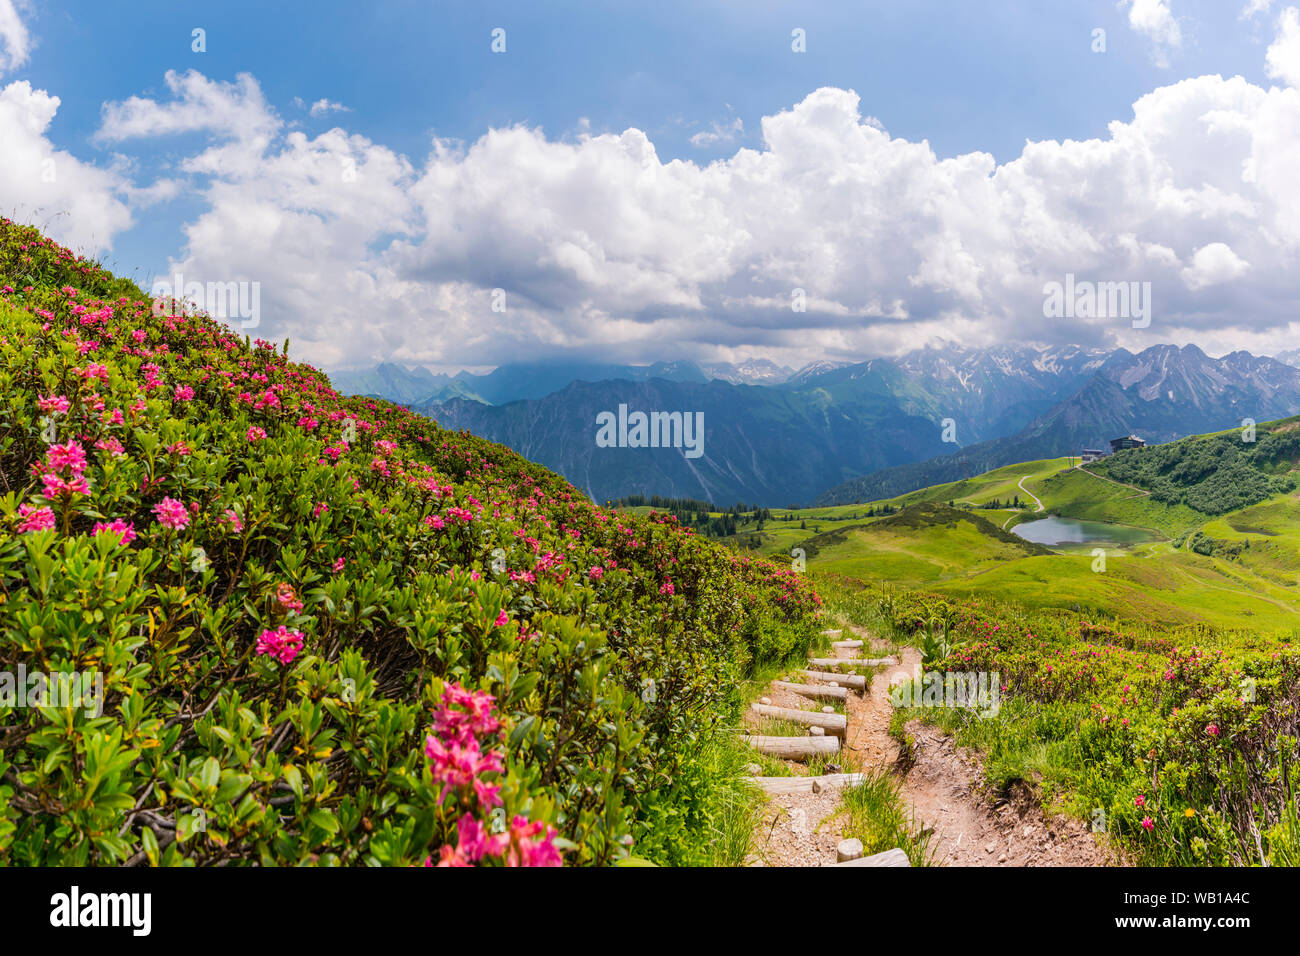 Germany, Bavaria, Allgaeu, Allgeau Alps, Fellhorn, view to Schlappolt Lake with Alpine roses next to hiking trail in the foreground Stock Photo